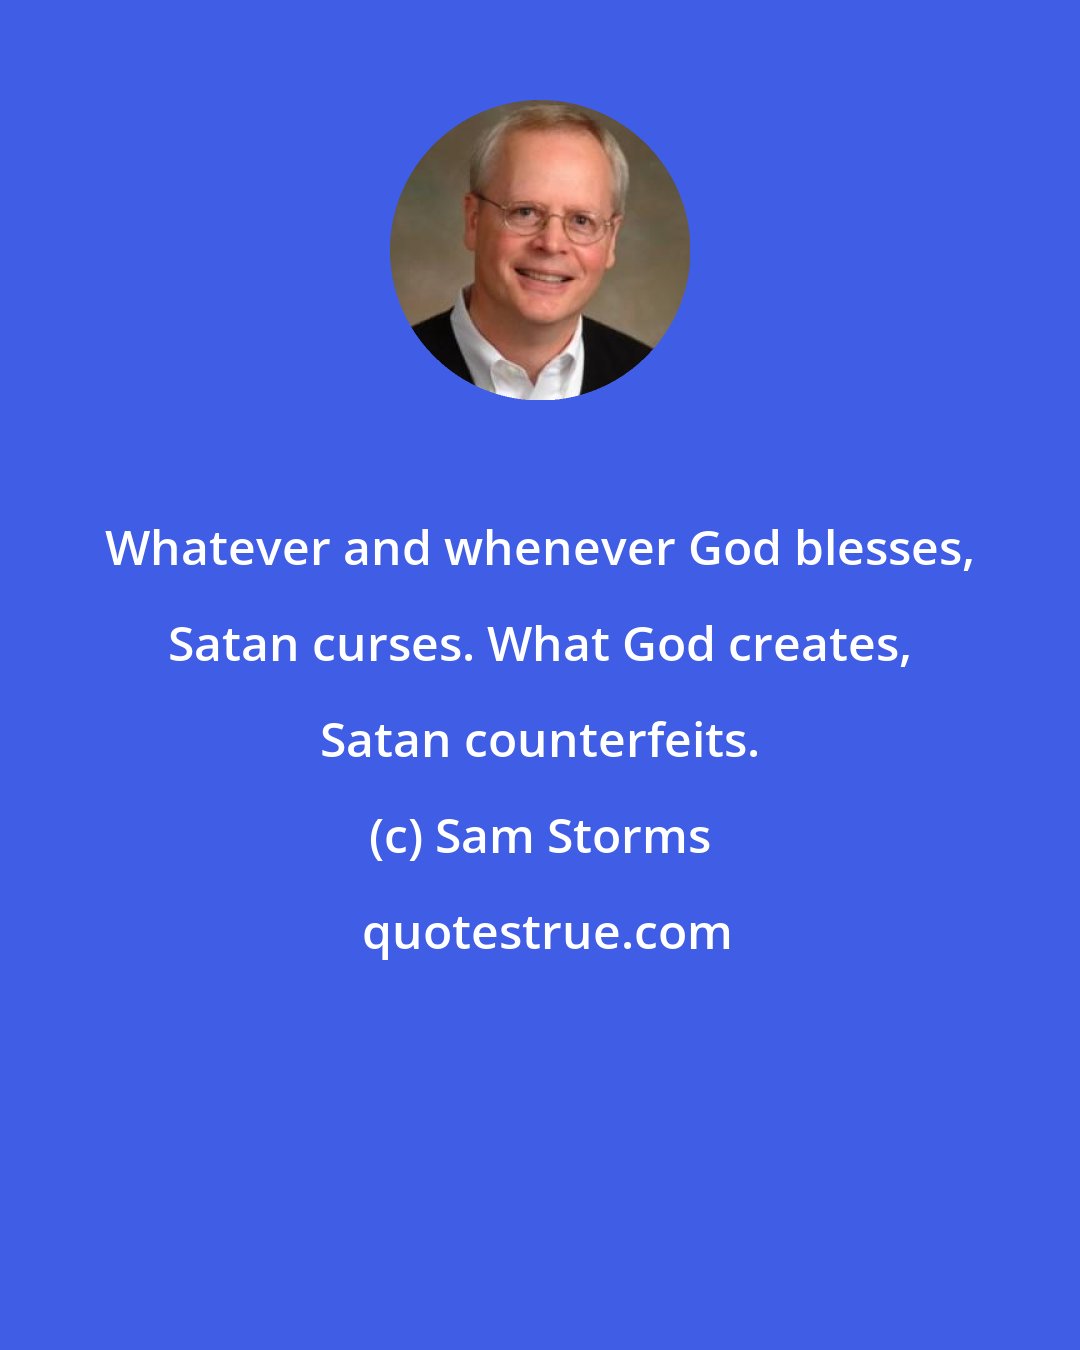 Sam Storms: Whatever and whenever God blesses, Satan curses. What God creates, Satan counterfeits.